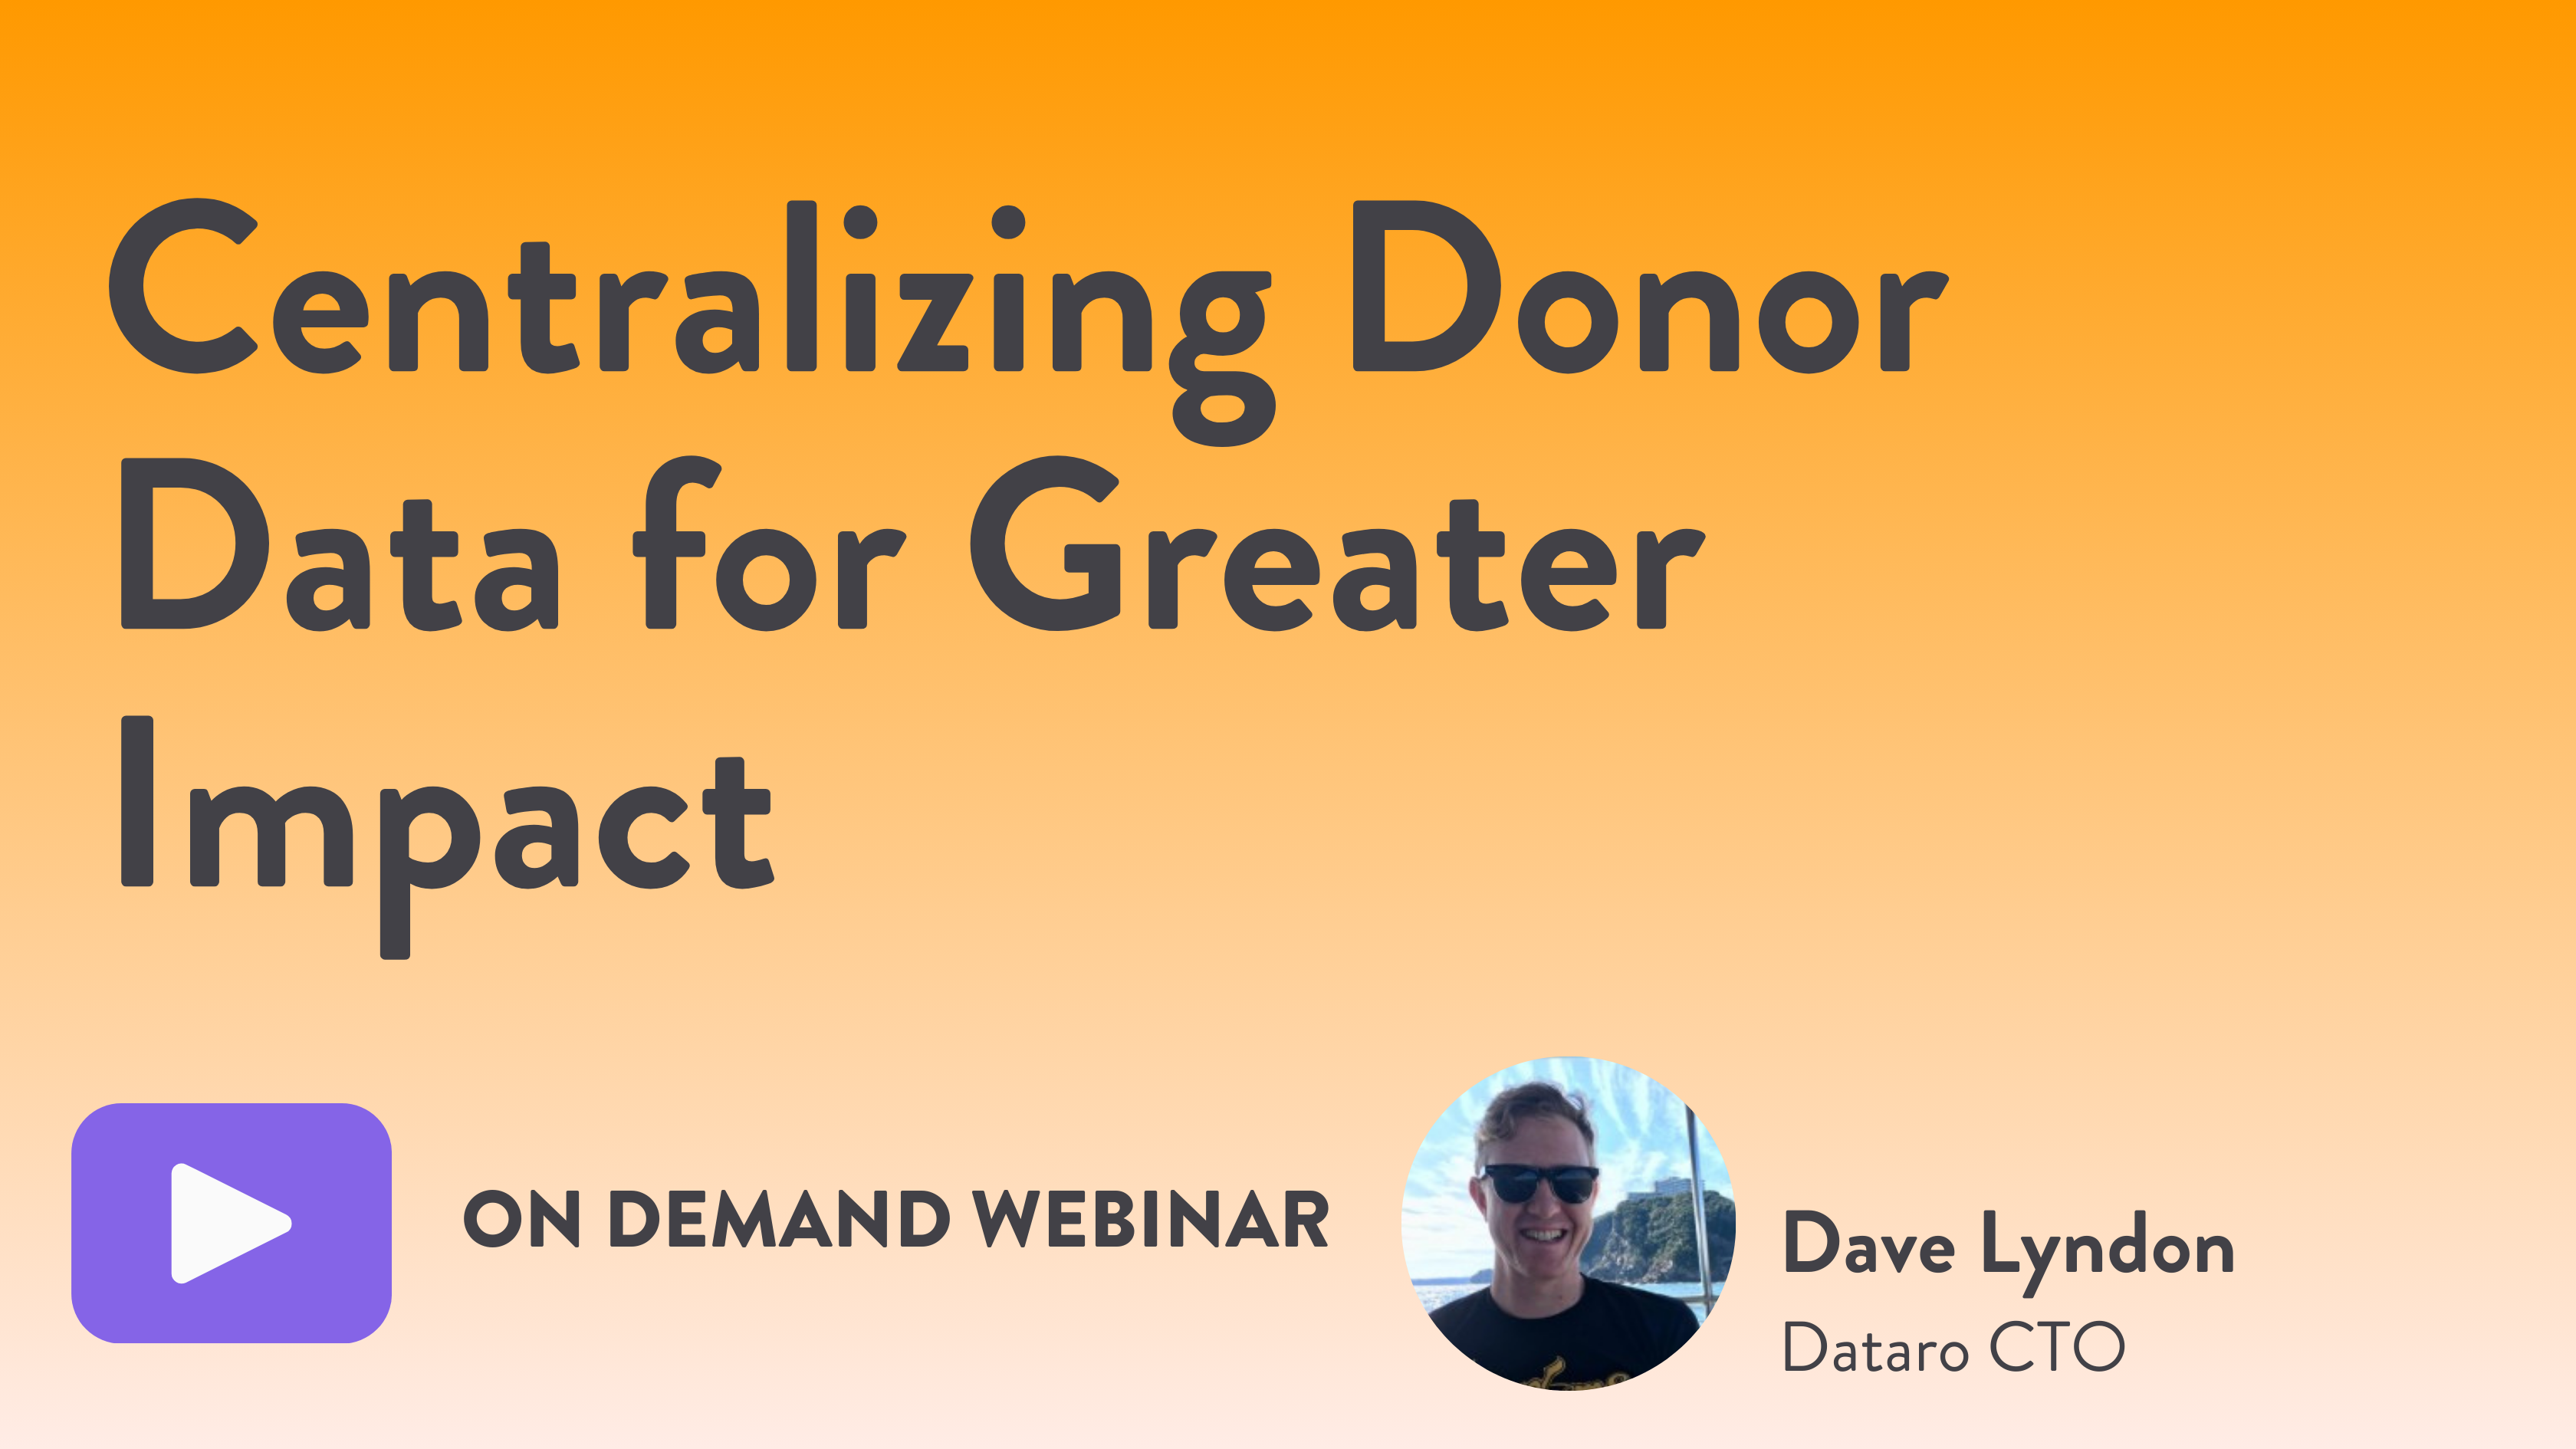 >Webinar: Centralizing Donor Data for Greater Impact